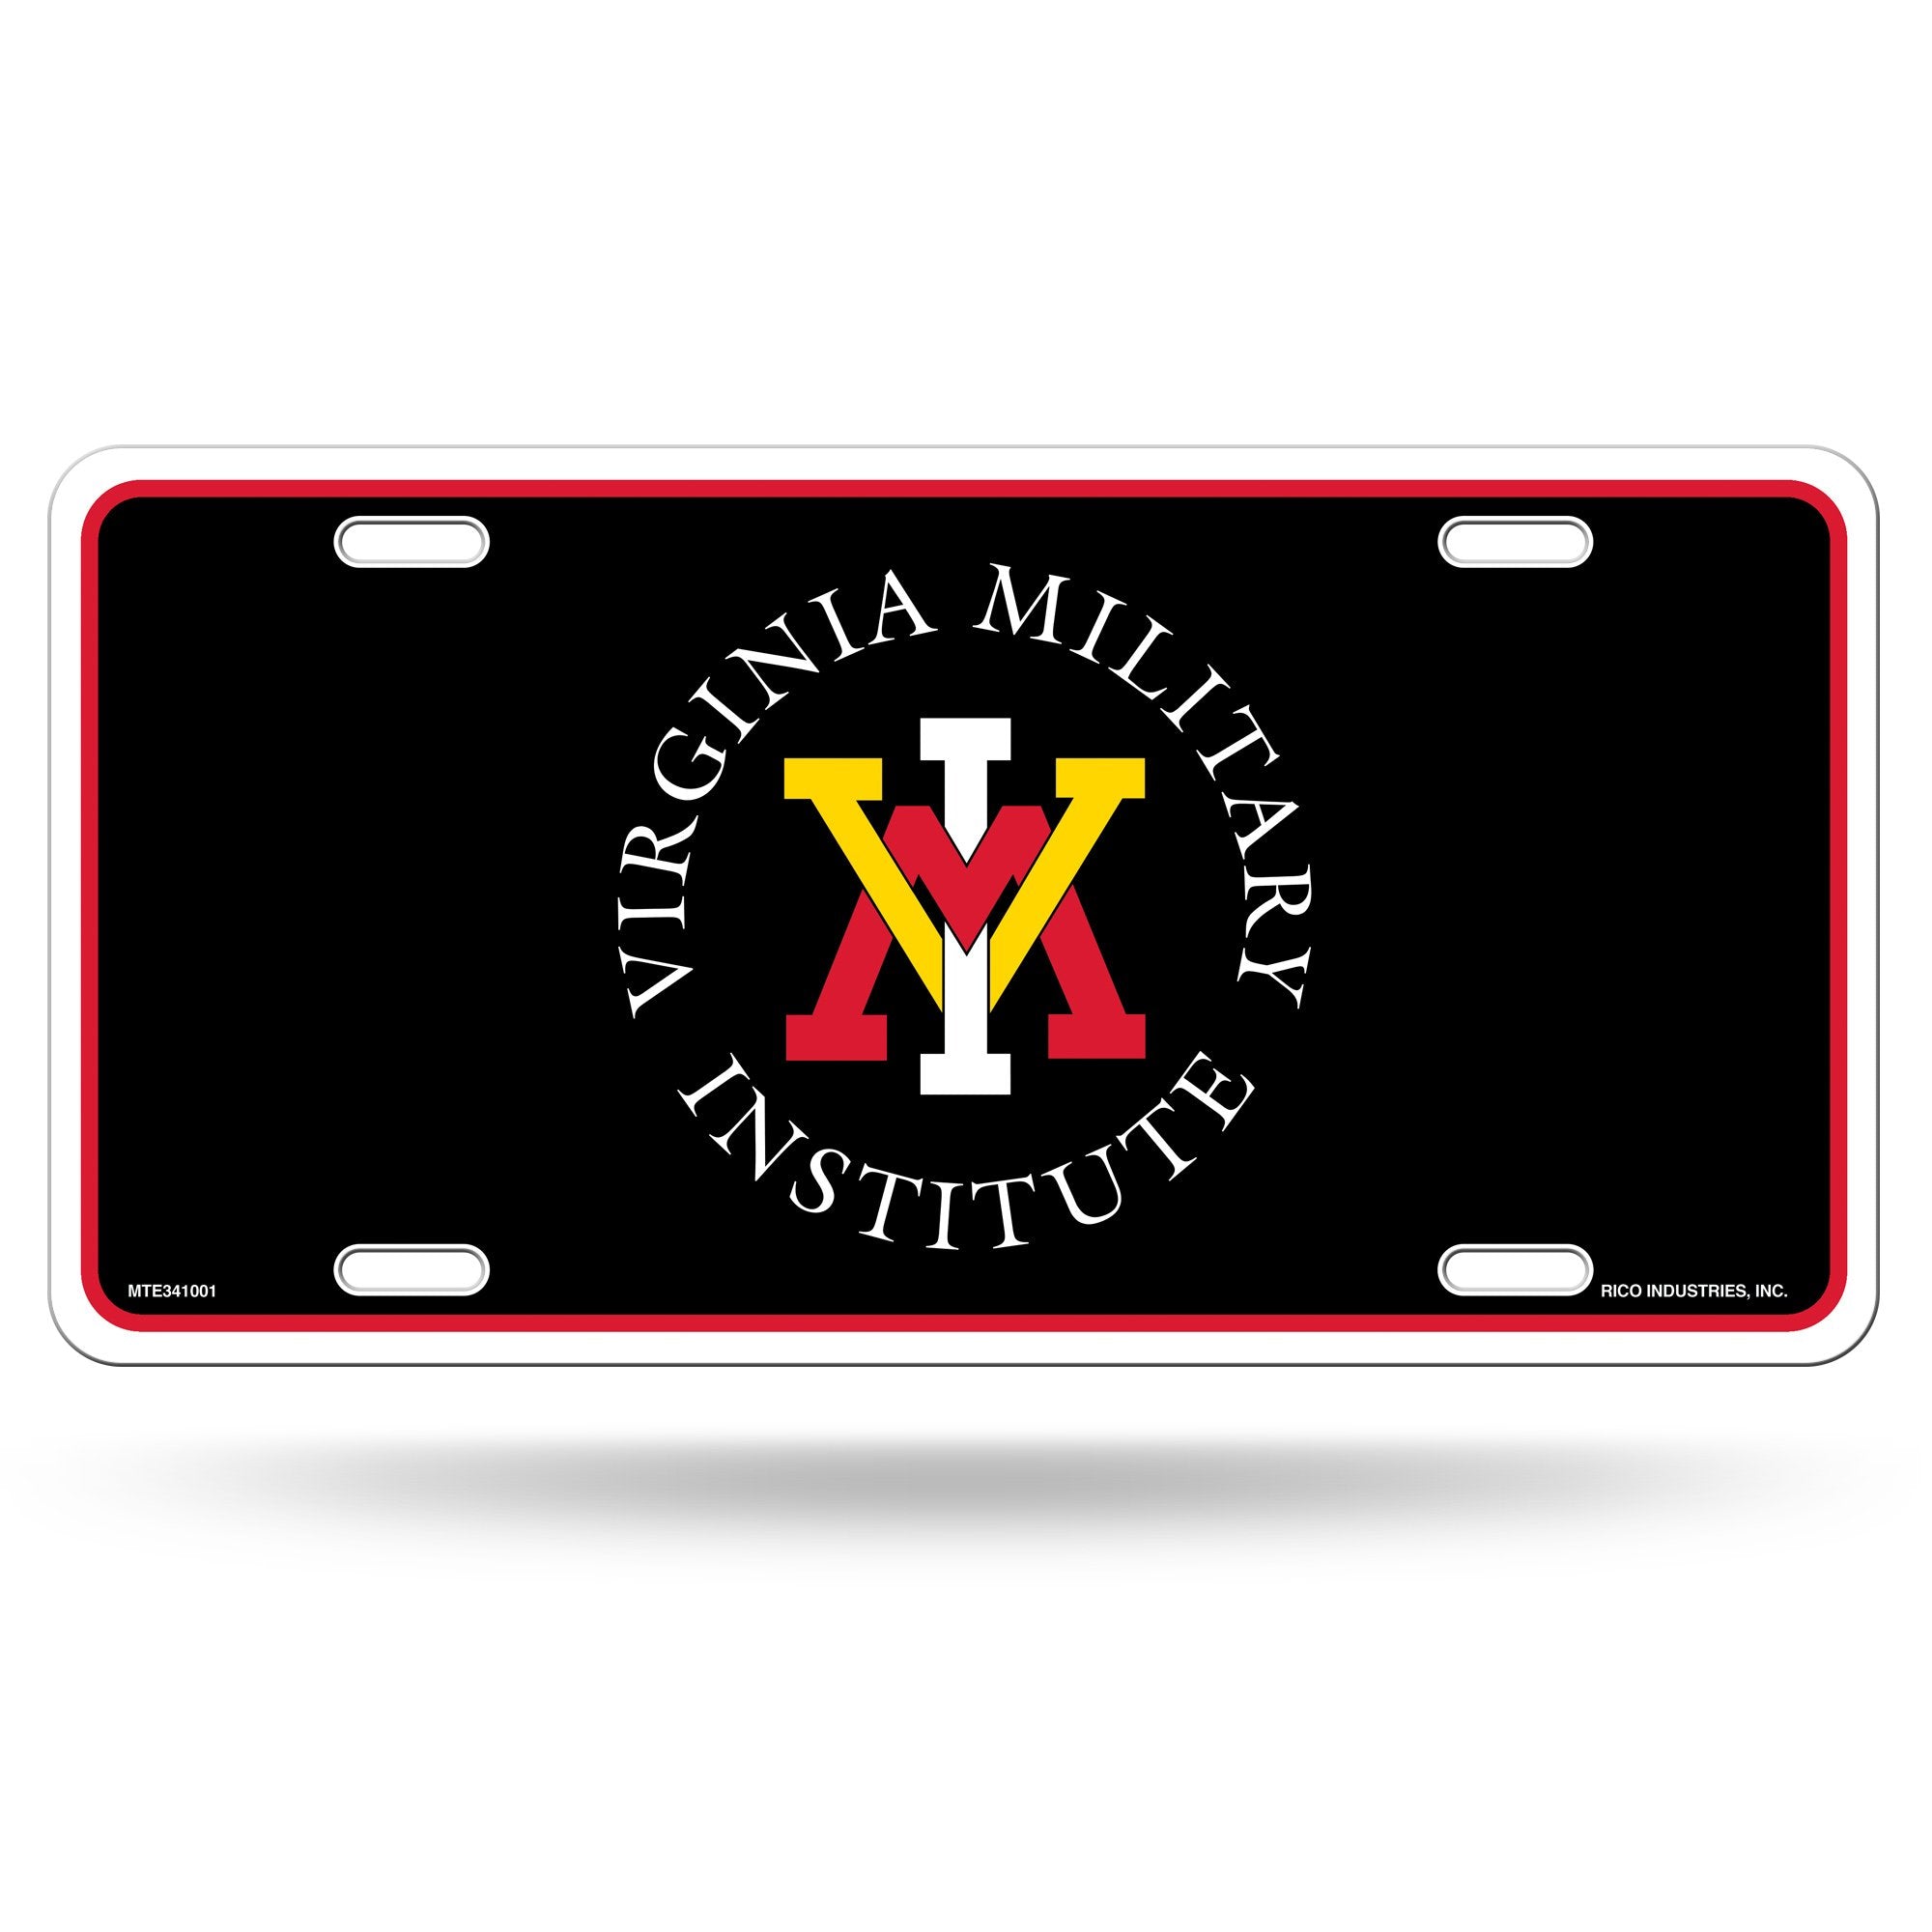 Virginia Military Institute Keydets VMI Metal Auto Tag License Plate, Black Design, 6x12 Inch